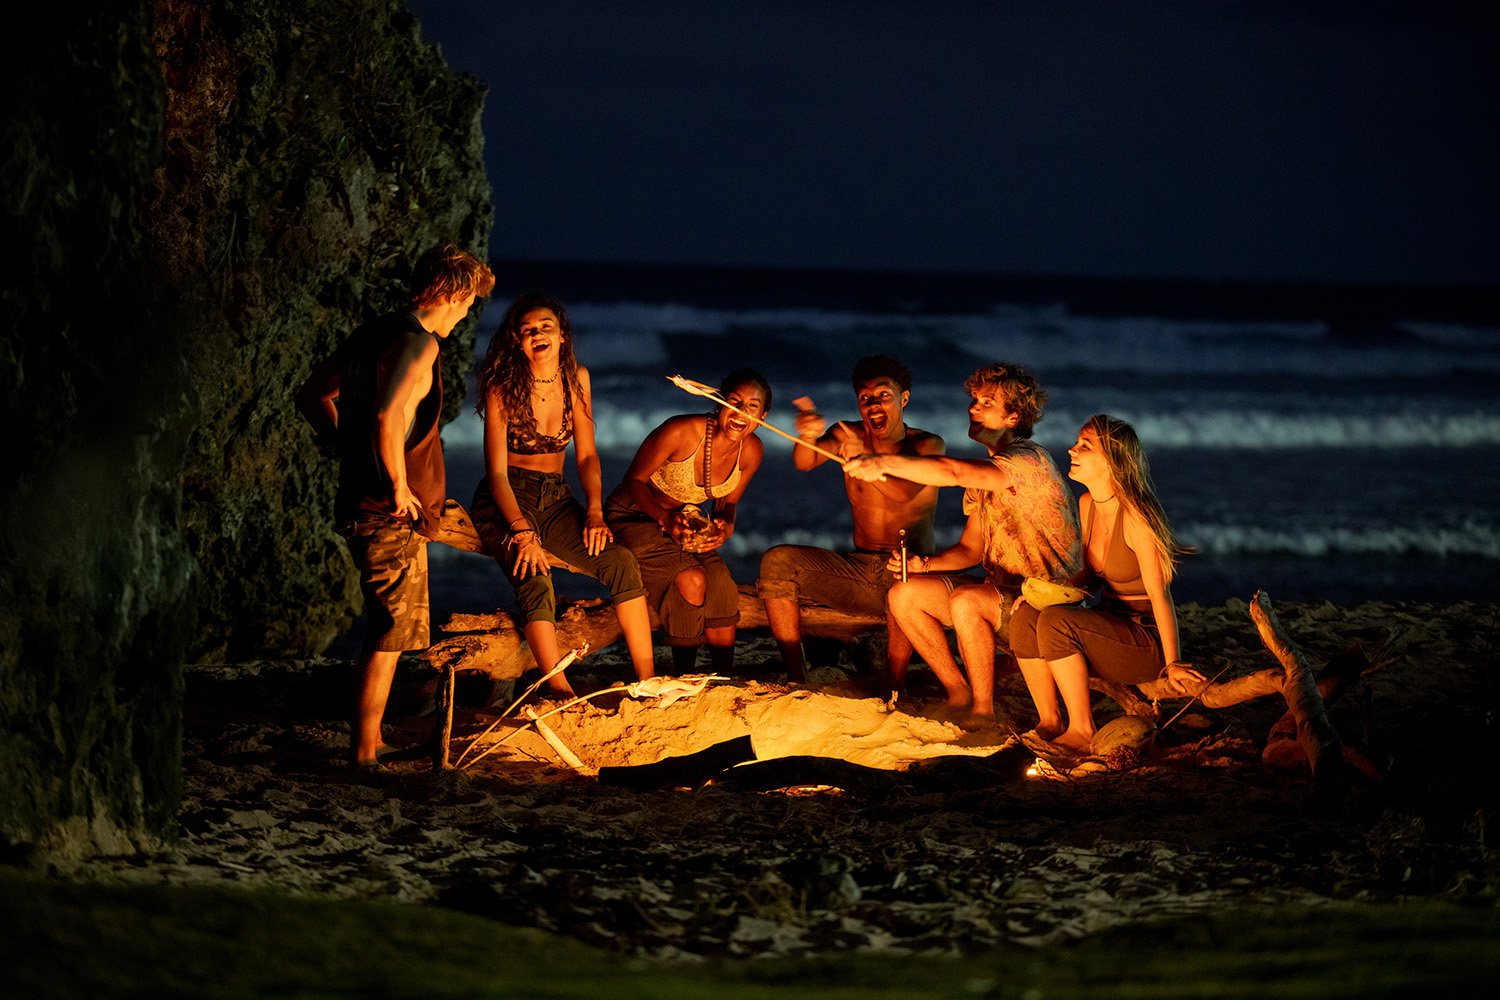 'Outer Banks' stars Rudy Pankow, Madison Bailey, Carlacia Grant, Jonathan Daviss, Chase Stokes, and Madelyn Cline sitting around a fire in season 2